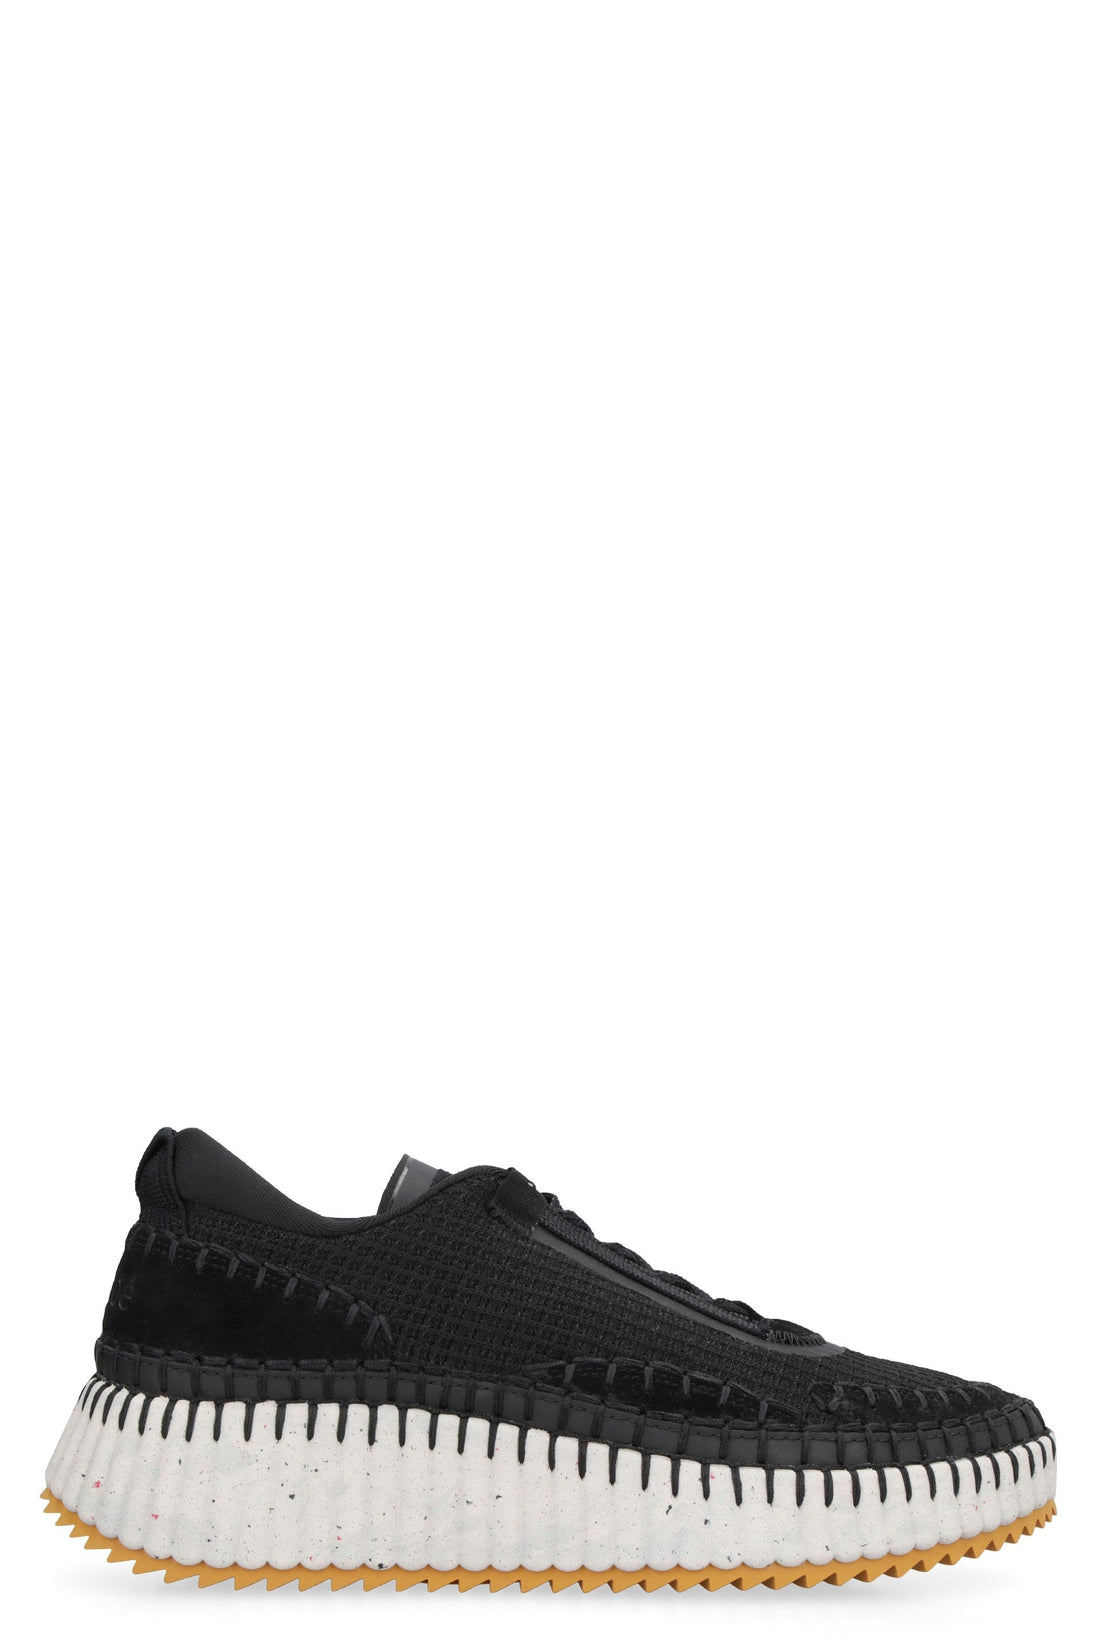 Chloé-OUTLET-SALE-Nama fabric low-top sneakers-ARCHIVIST